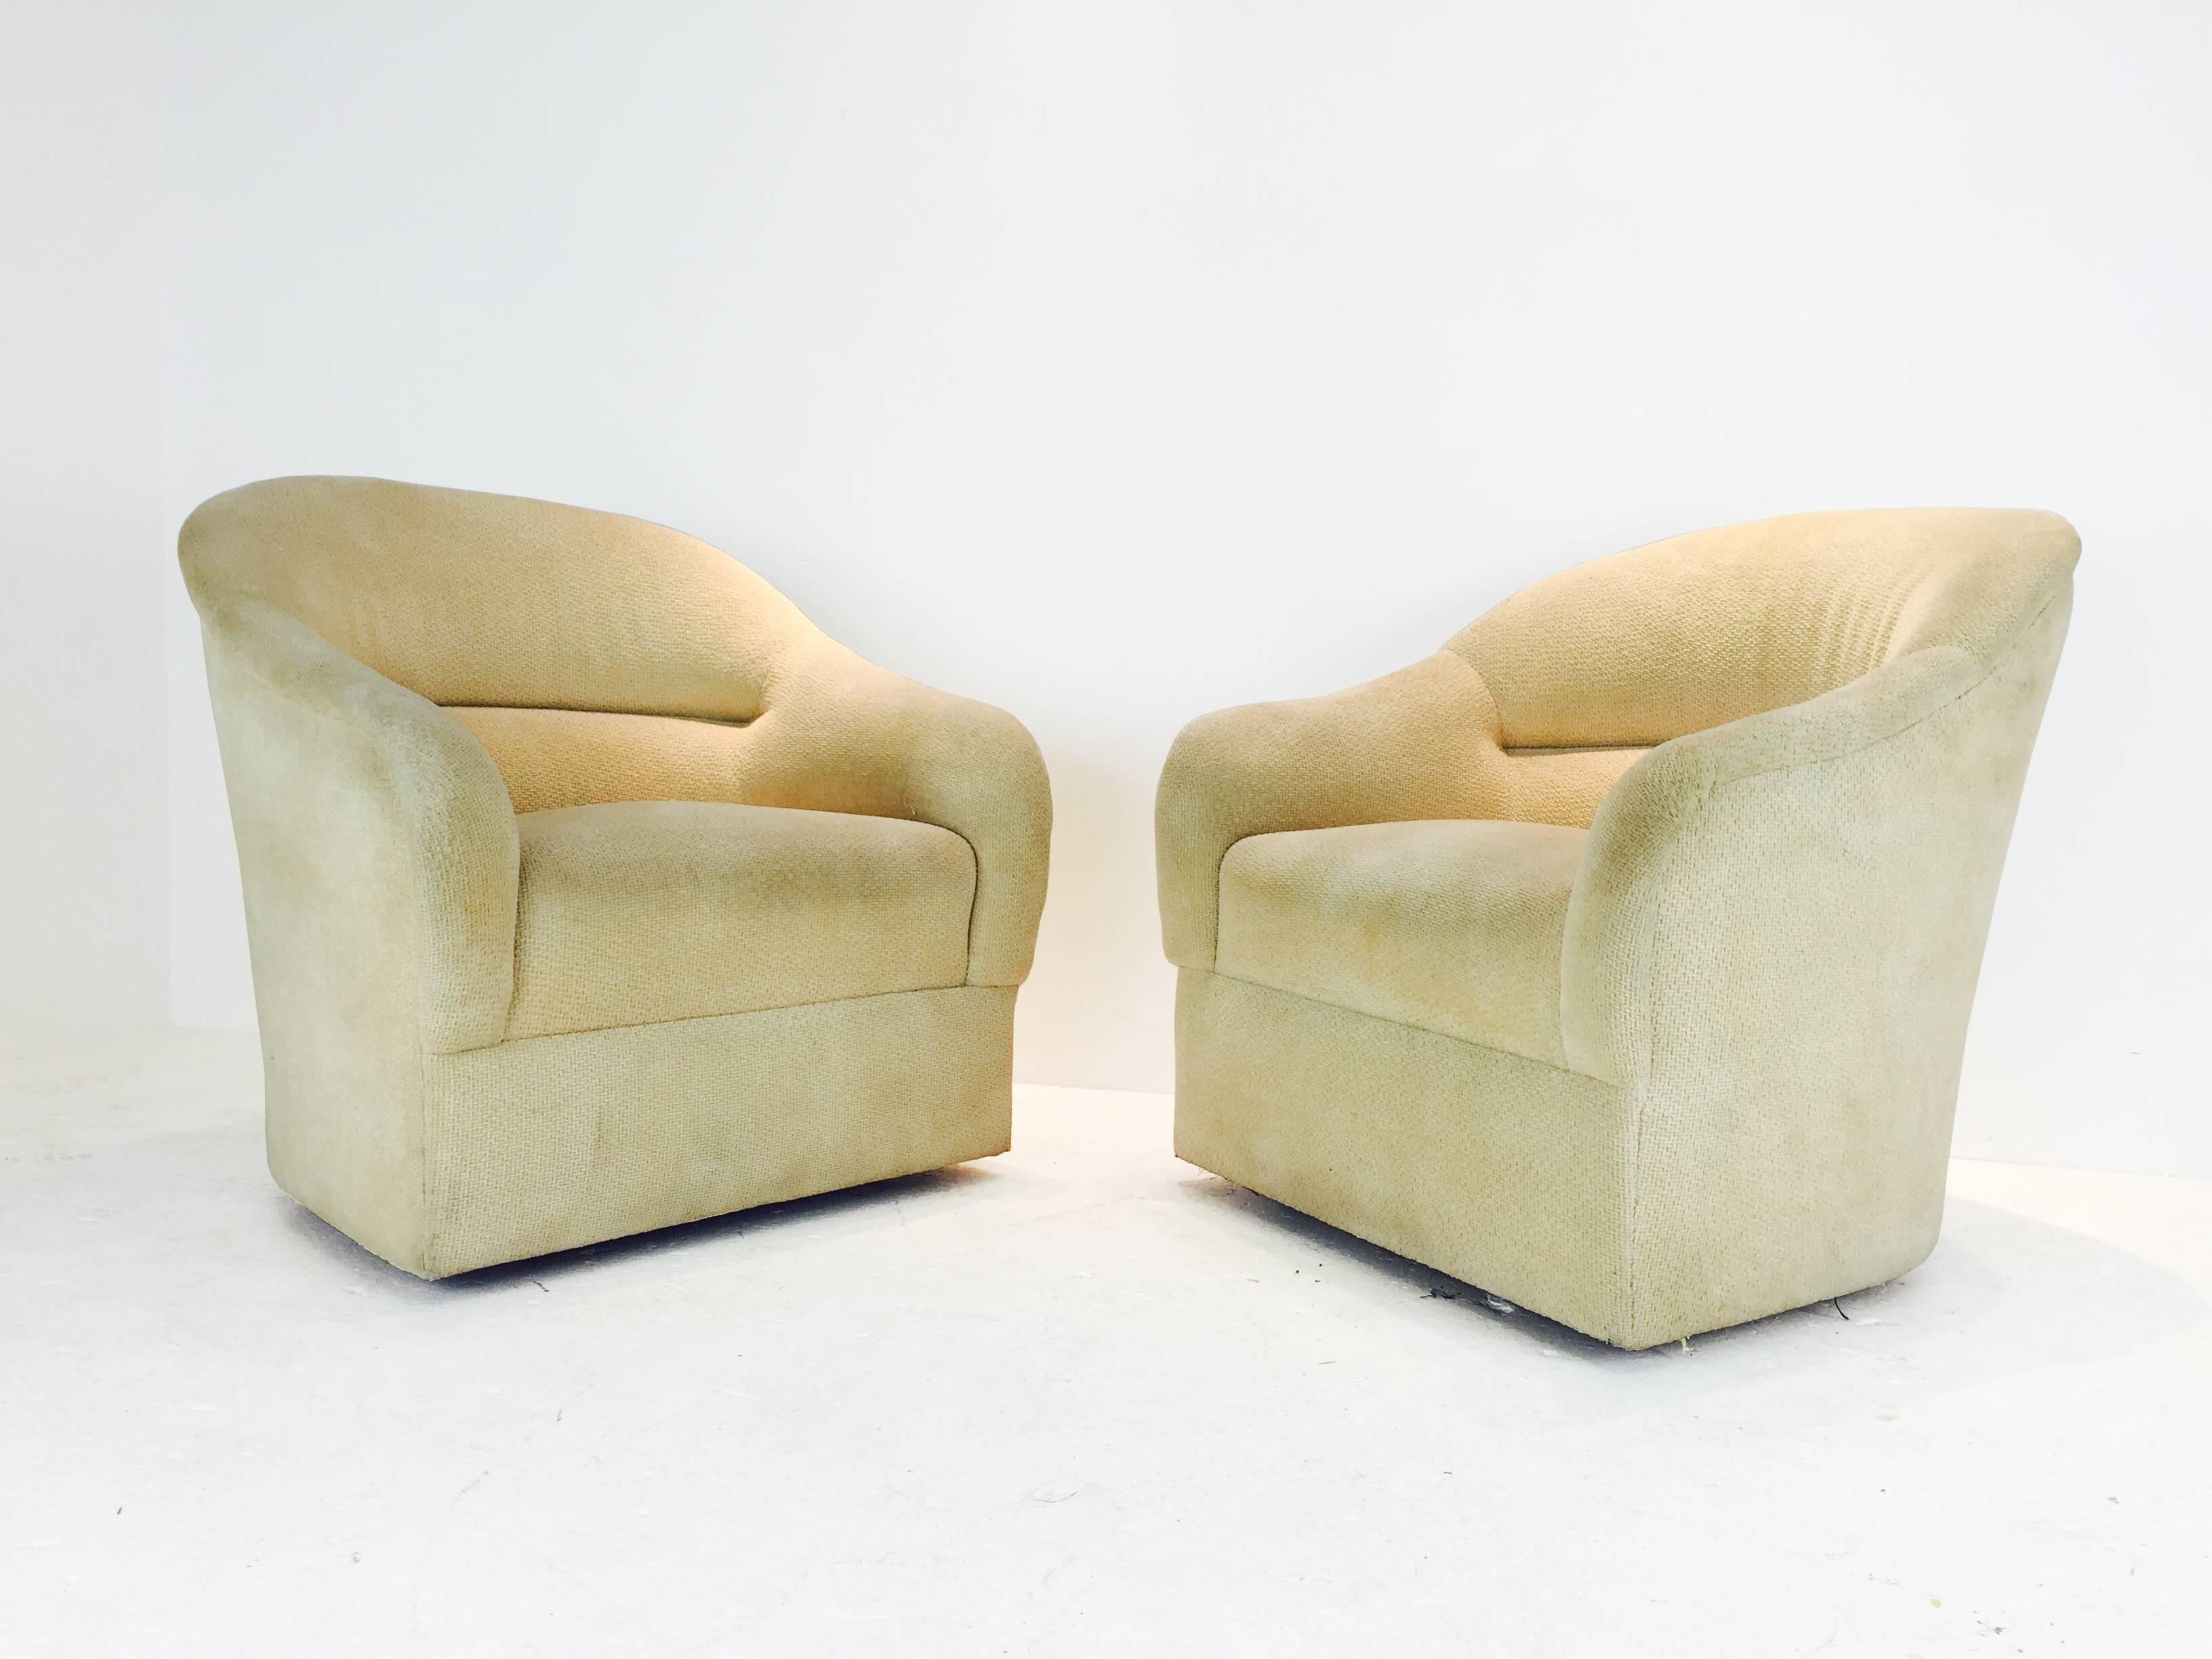 Pair of Ward Bennett barrel back club chairs. Original fabric. Reupholstery recommended. Wood legs.